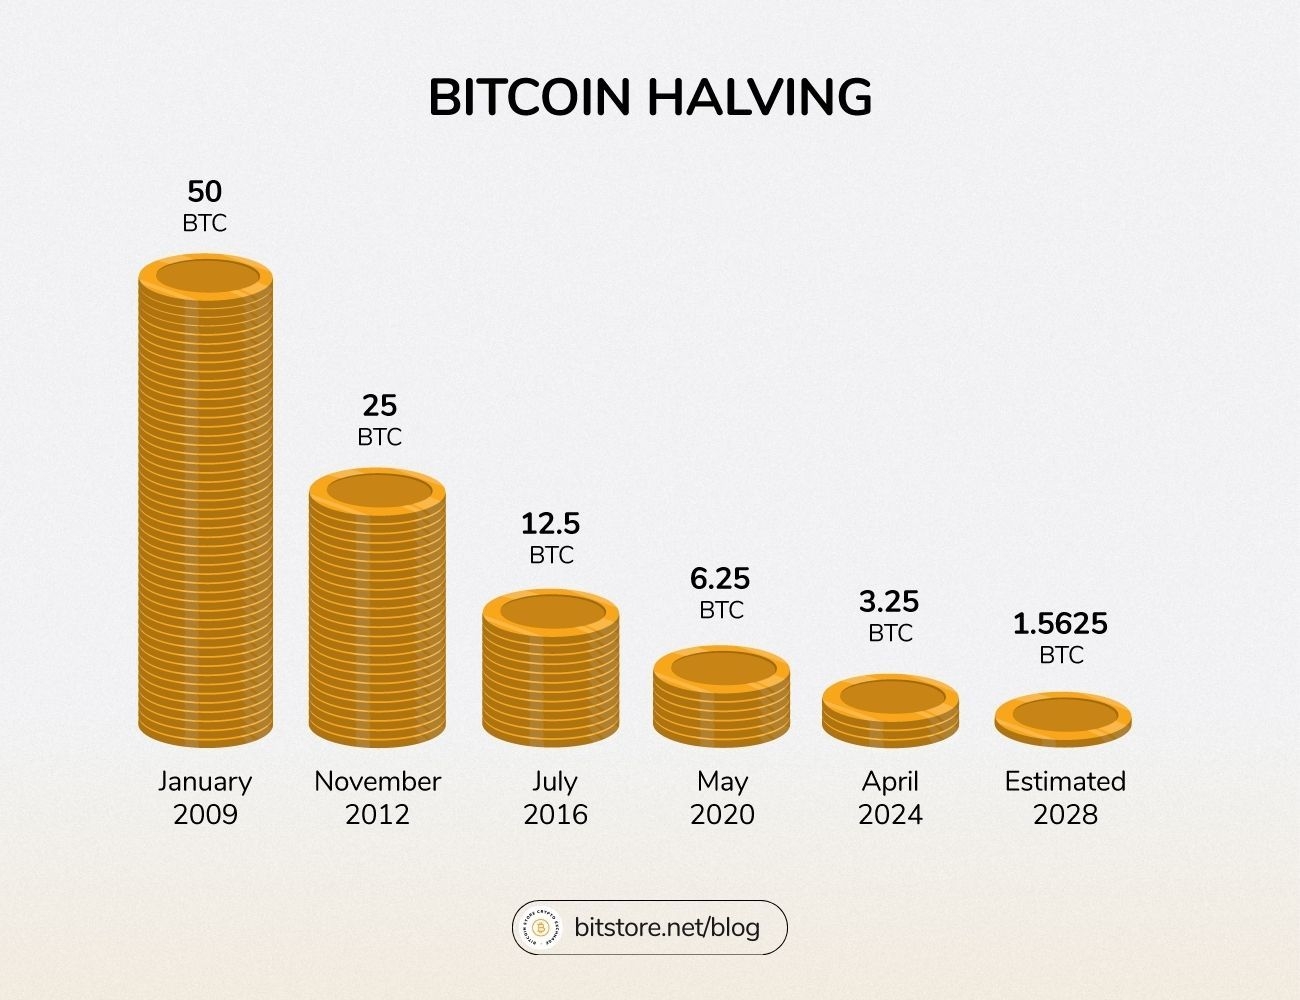 Bitcoin Halving over the years